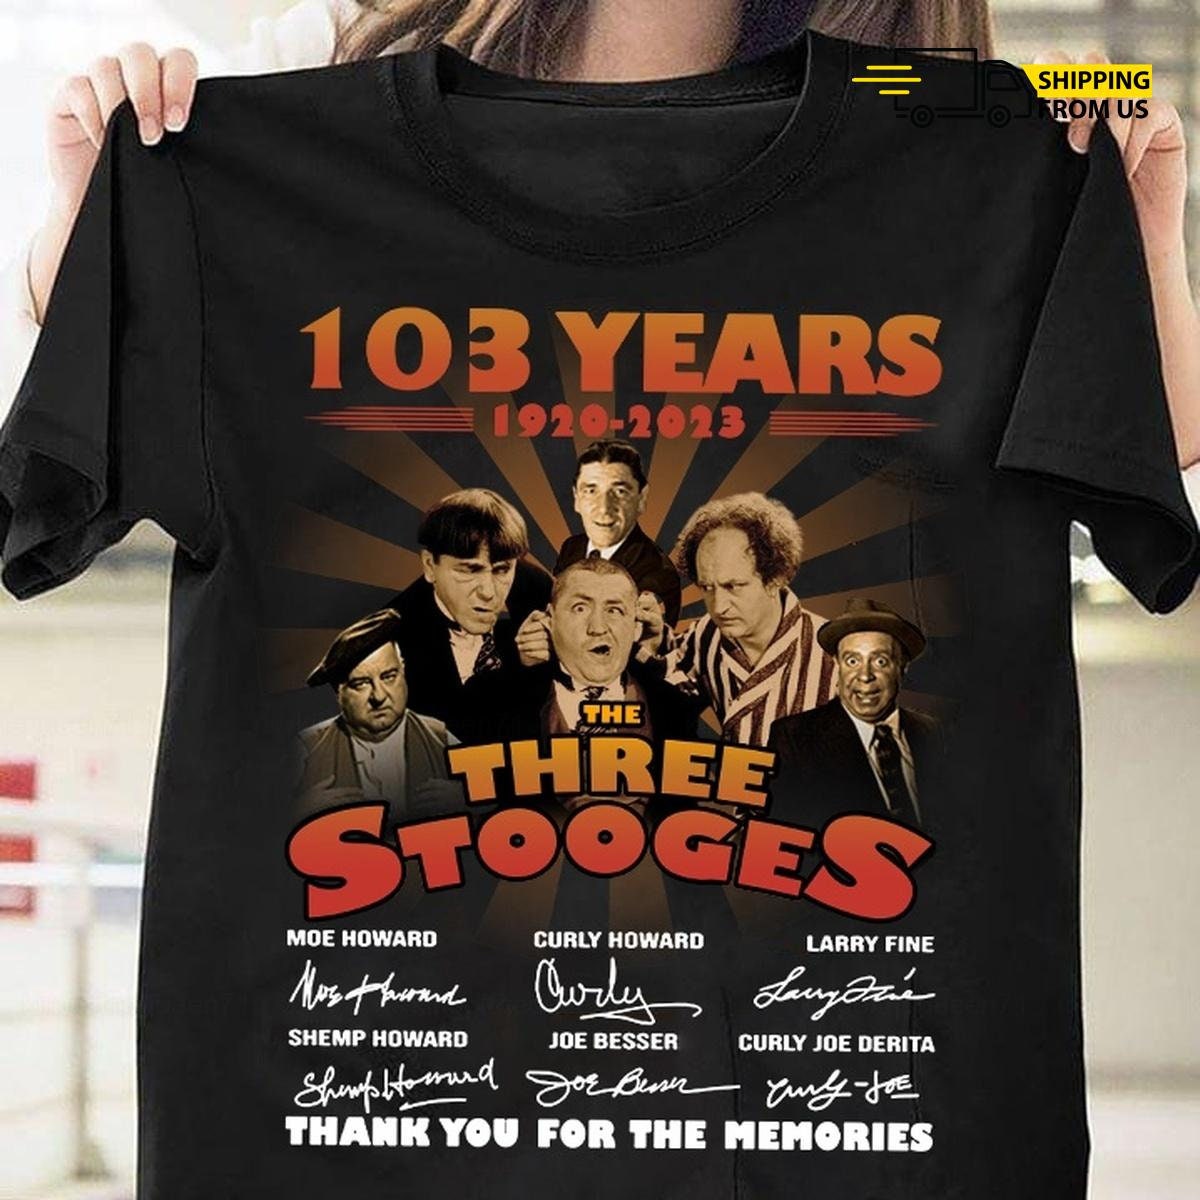 The Three Stooges T-shirt 103 Years of the Three Stooges